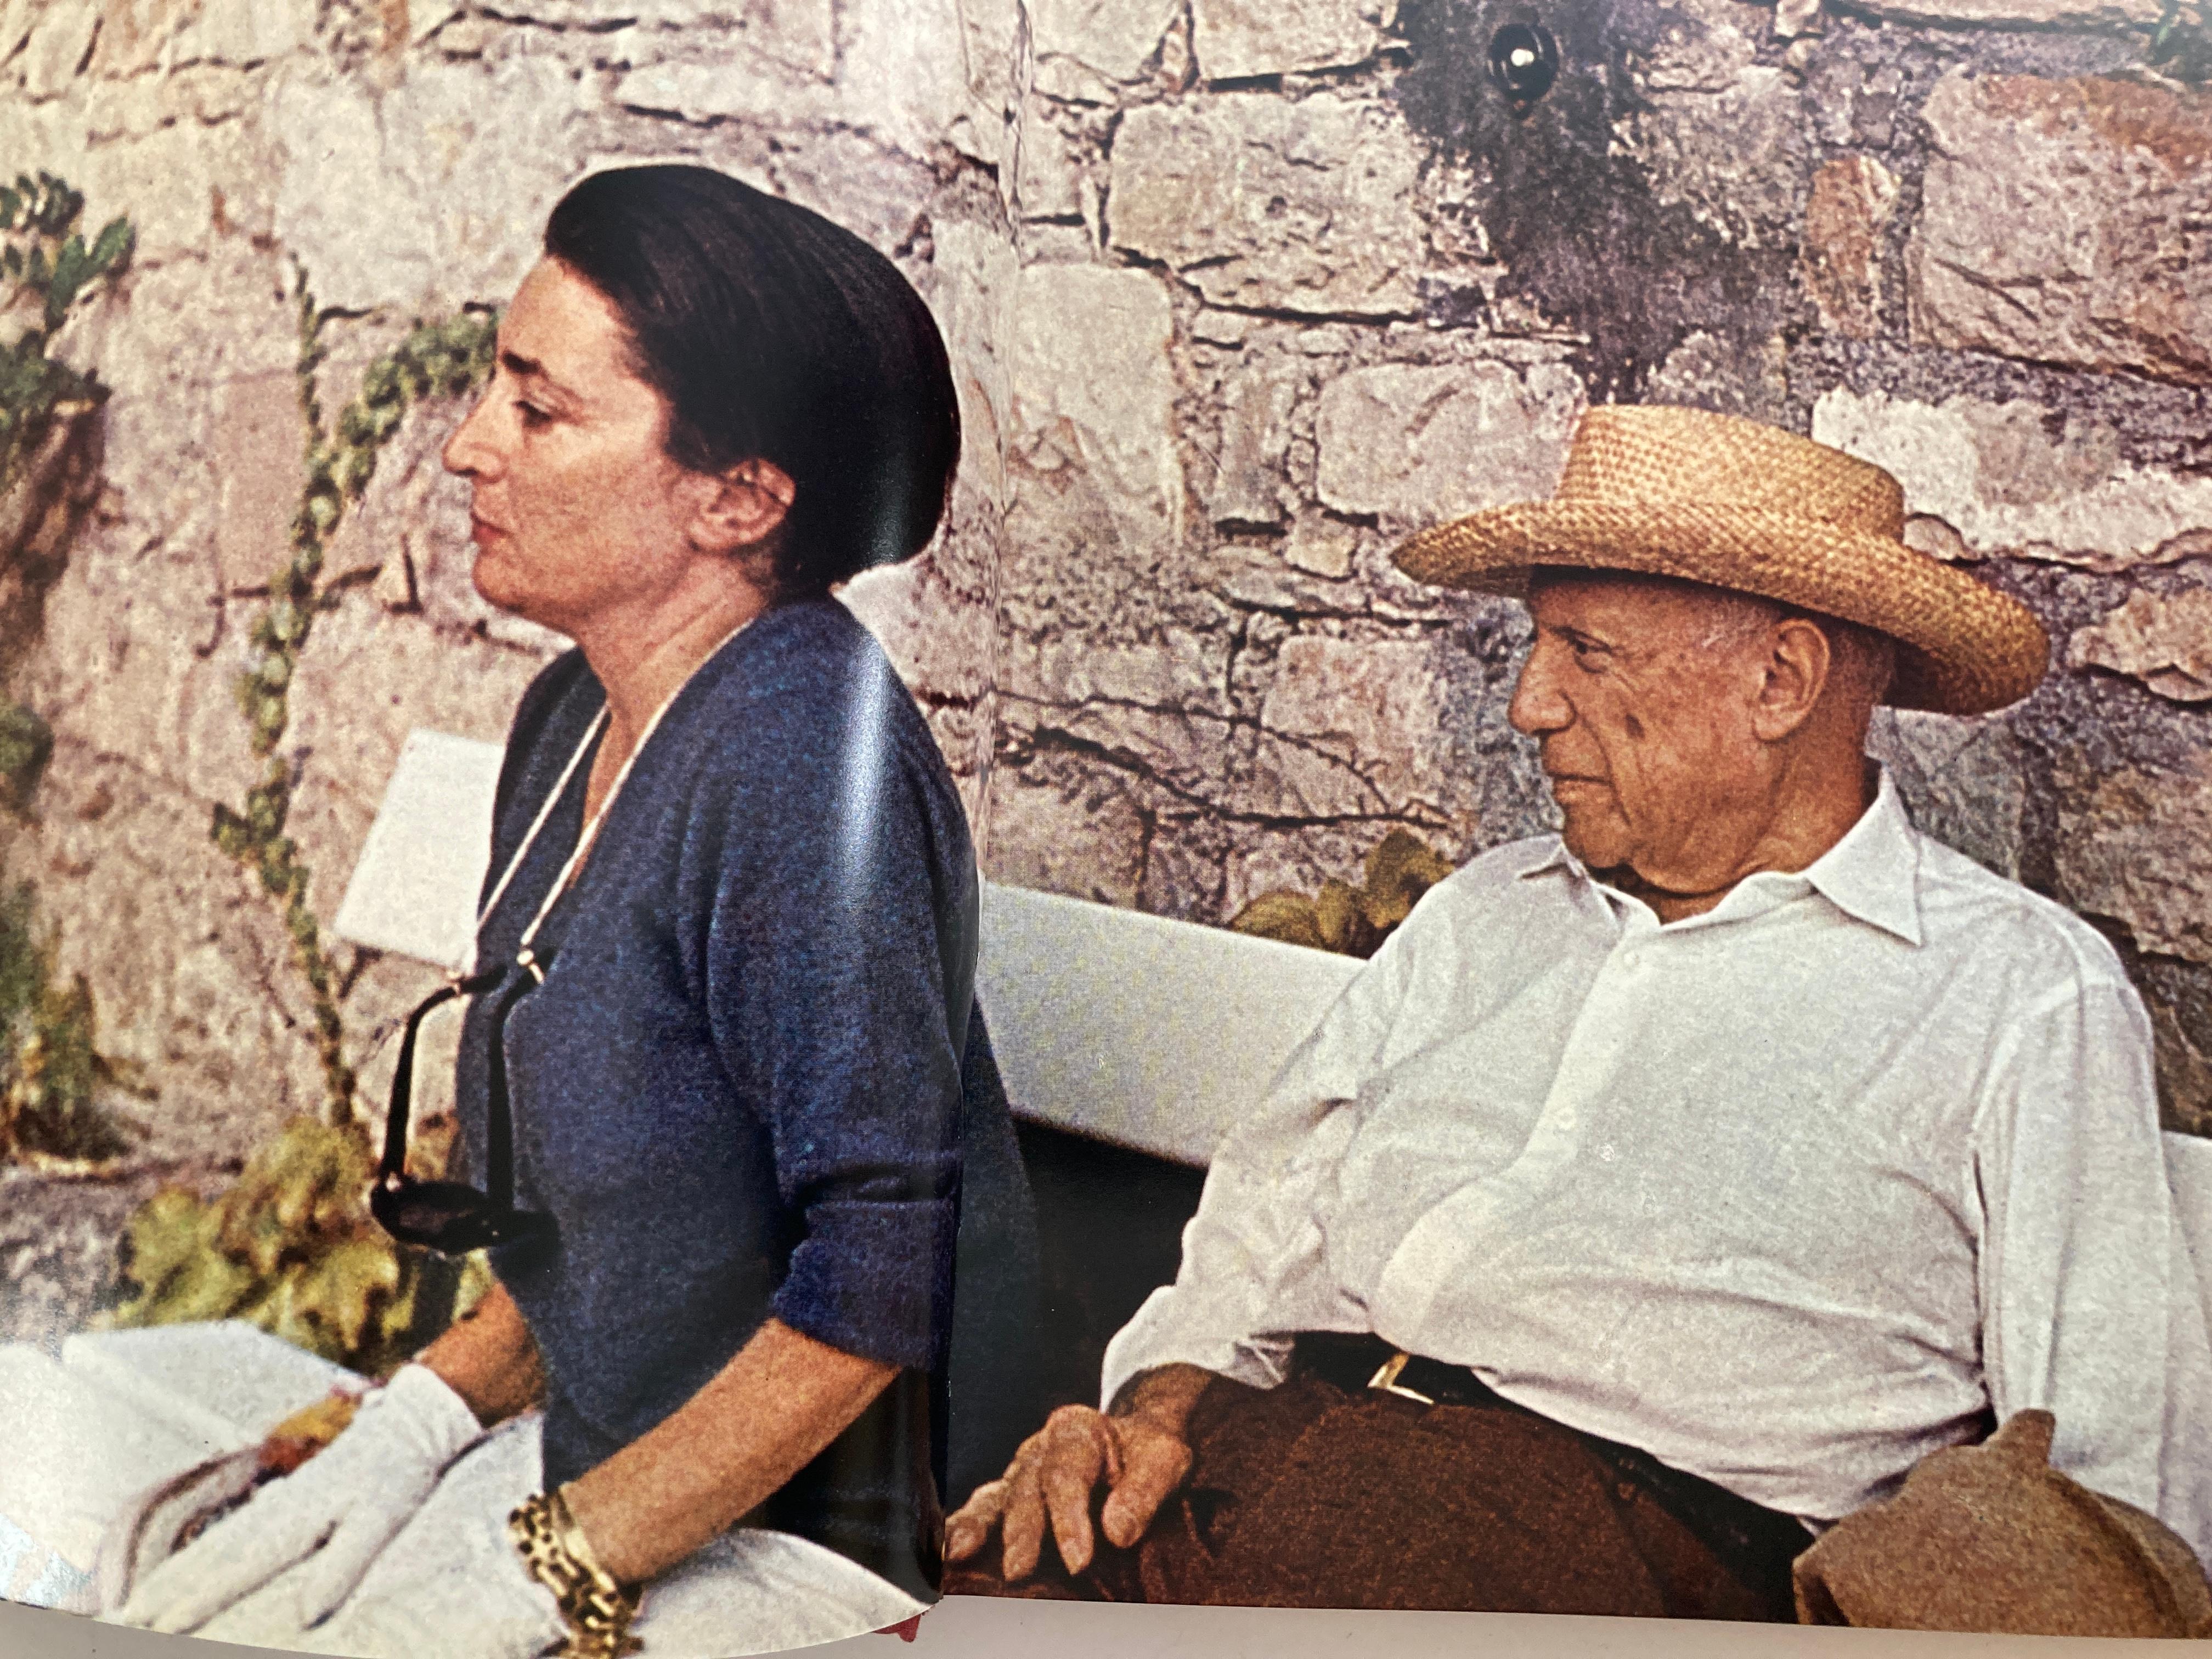 Paper Forever Picasso An Intimate Look at His Last Years Book by Roberto Otero